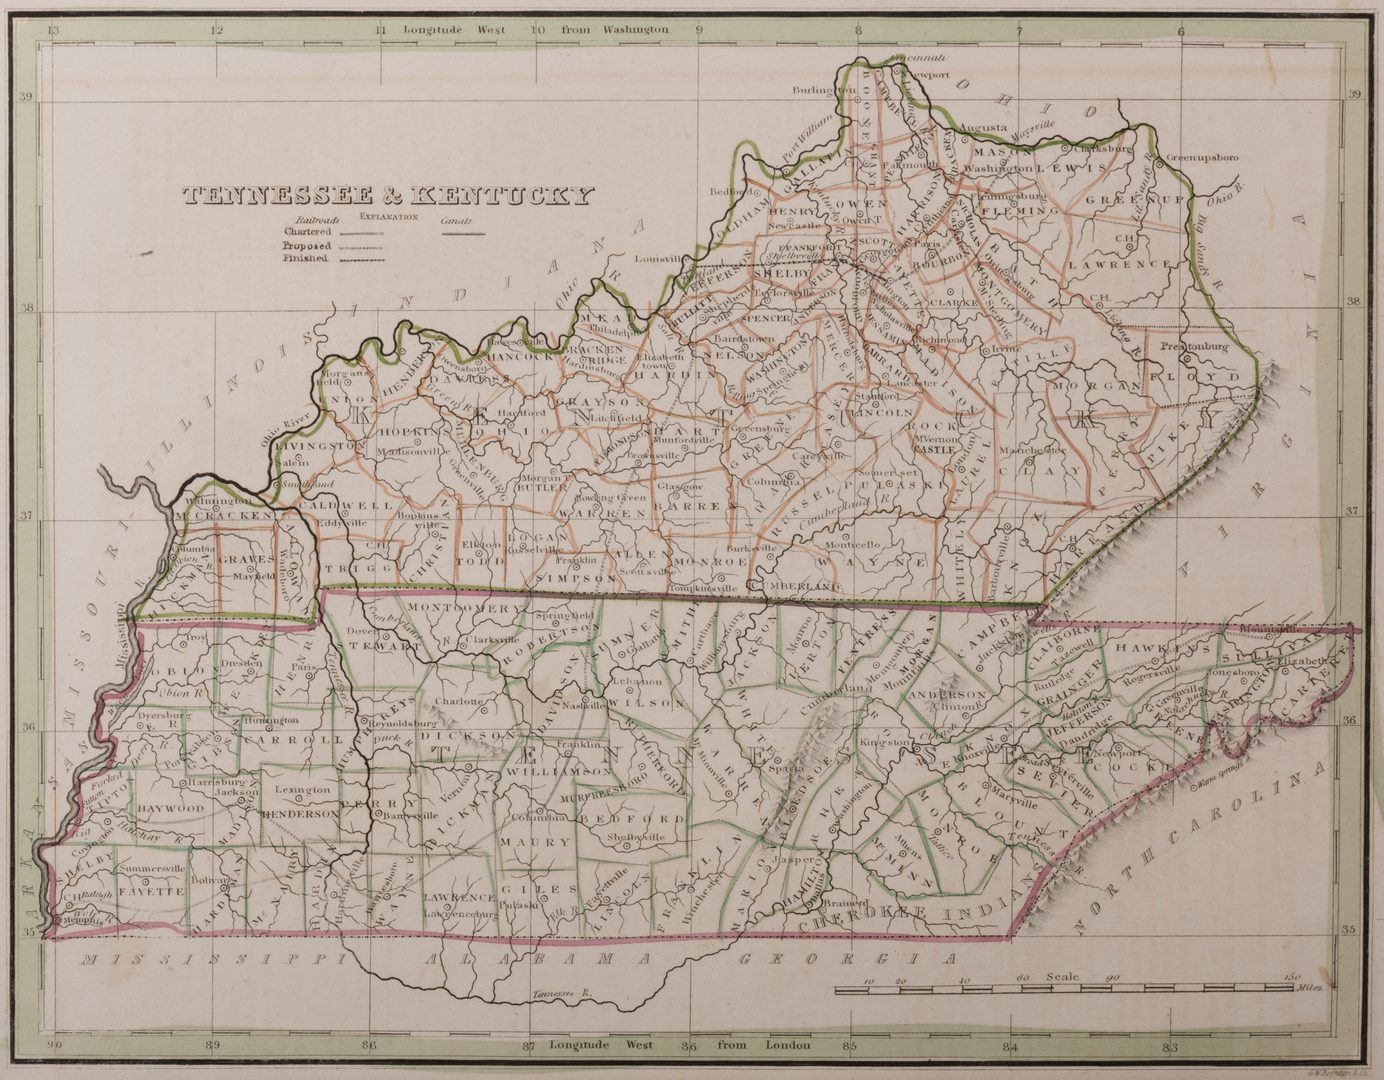 Lot 213: 5 Kentucky and Tennessee Maps